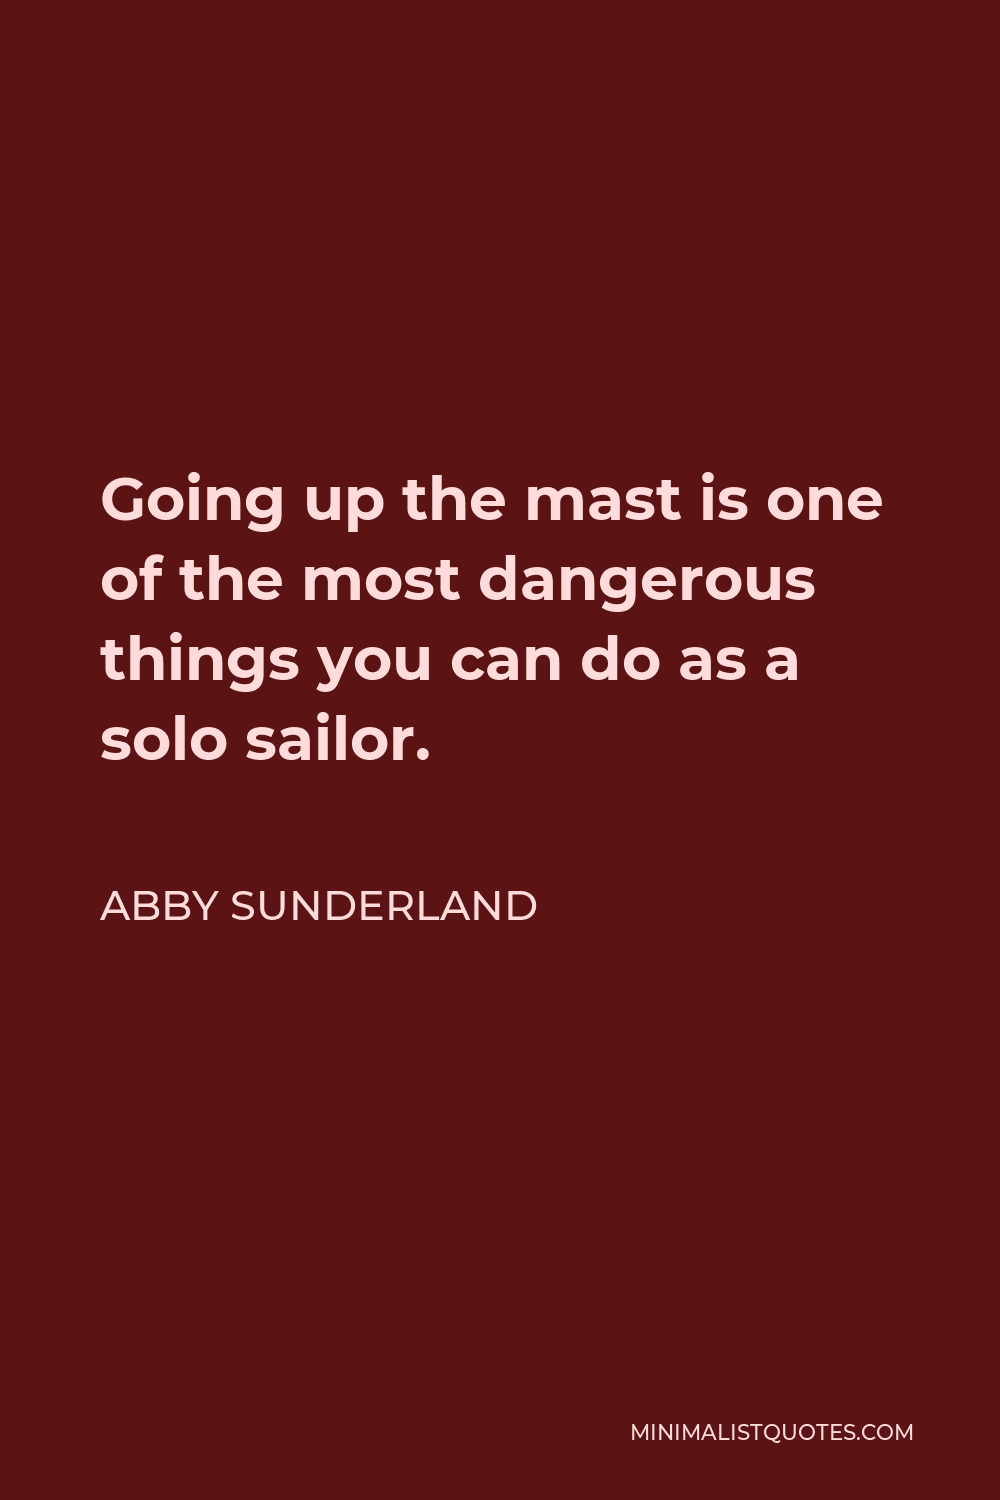 Abby Sunderland Quote - Going up the mast is one of the most dangerous things you can do as a solo sailor.